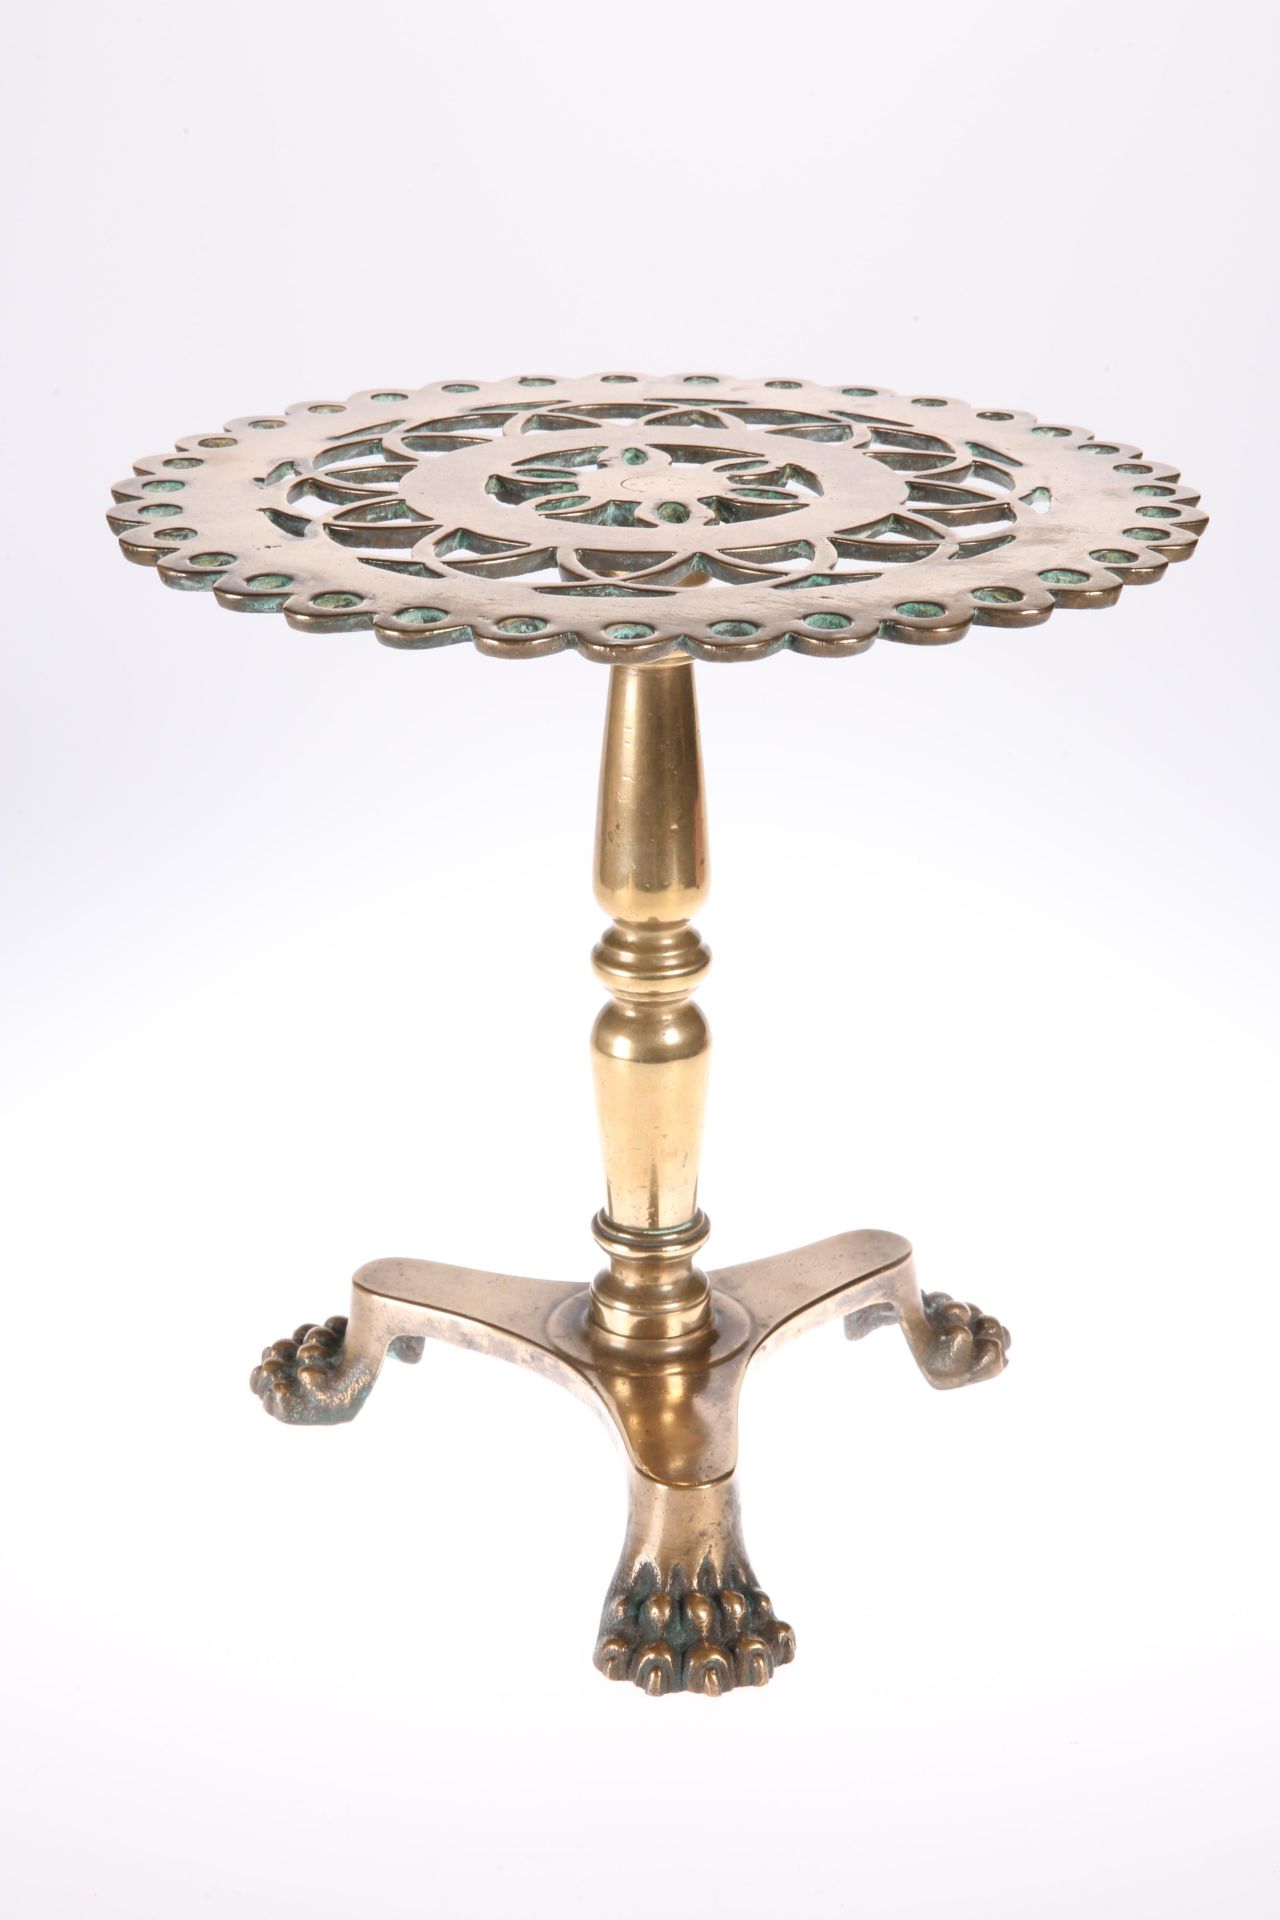 A GOOD VICTORIAN HEAVY BRASS TRIVET, in the form of a tripod table, with pierced top and triform